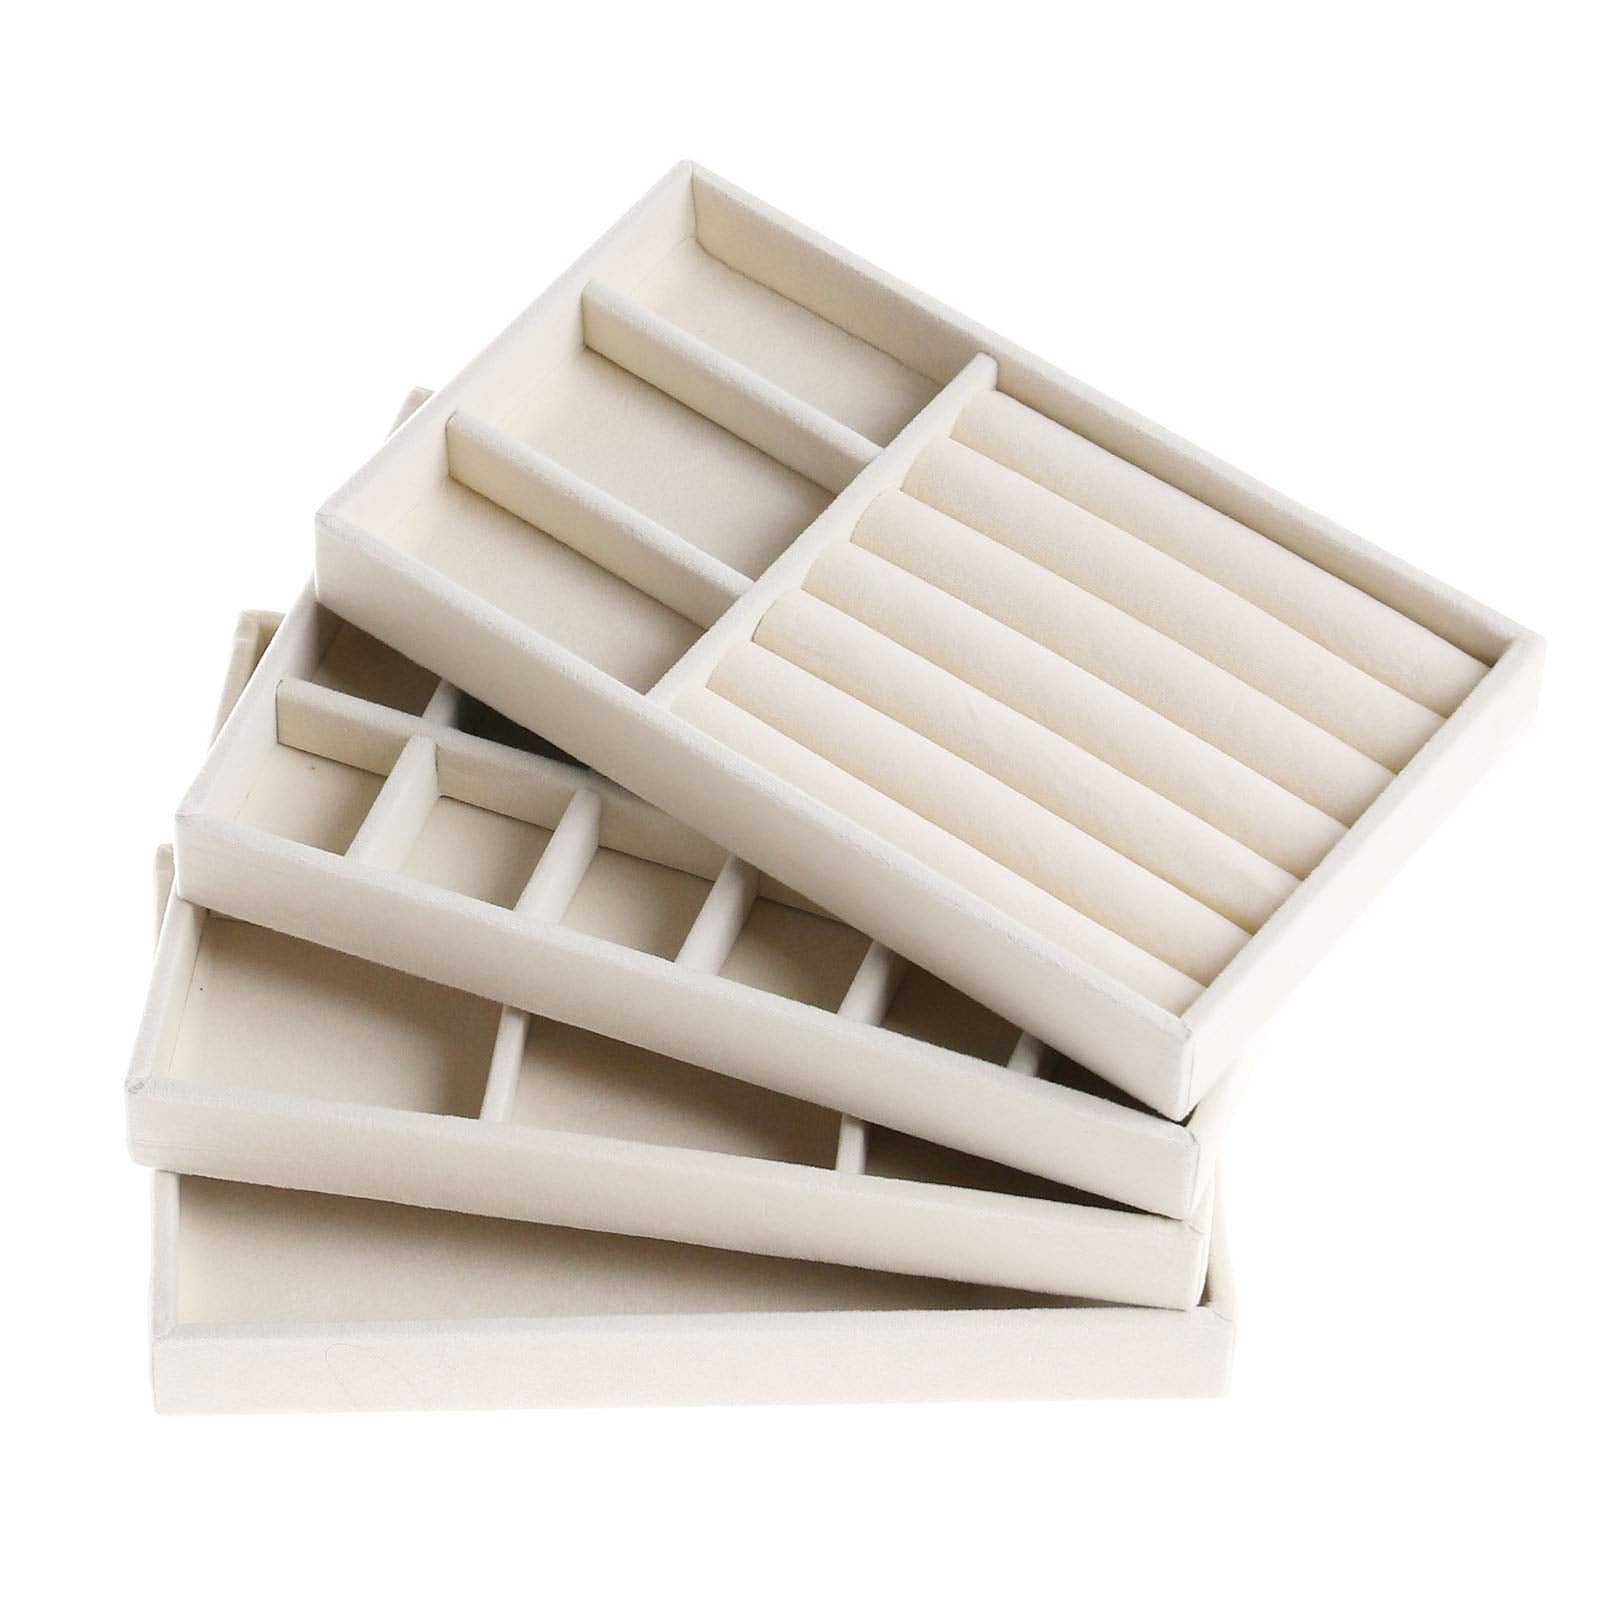 Jewellery Trays for Drawers, Stackable Jewellery Inserts Dividers Box Storage Organiser Compartments, Beige